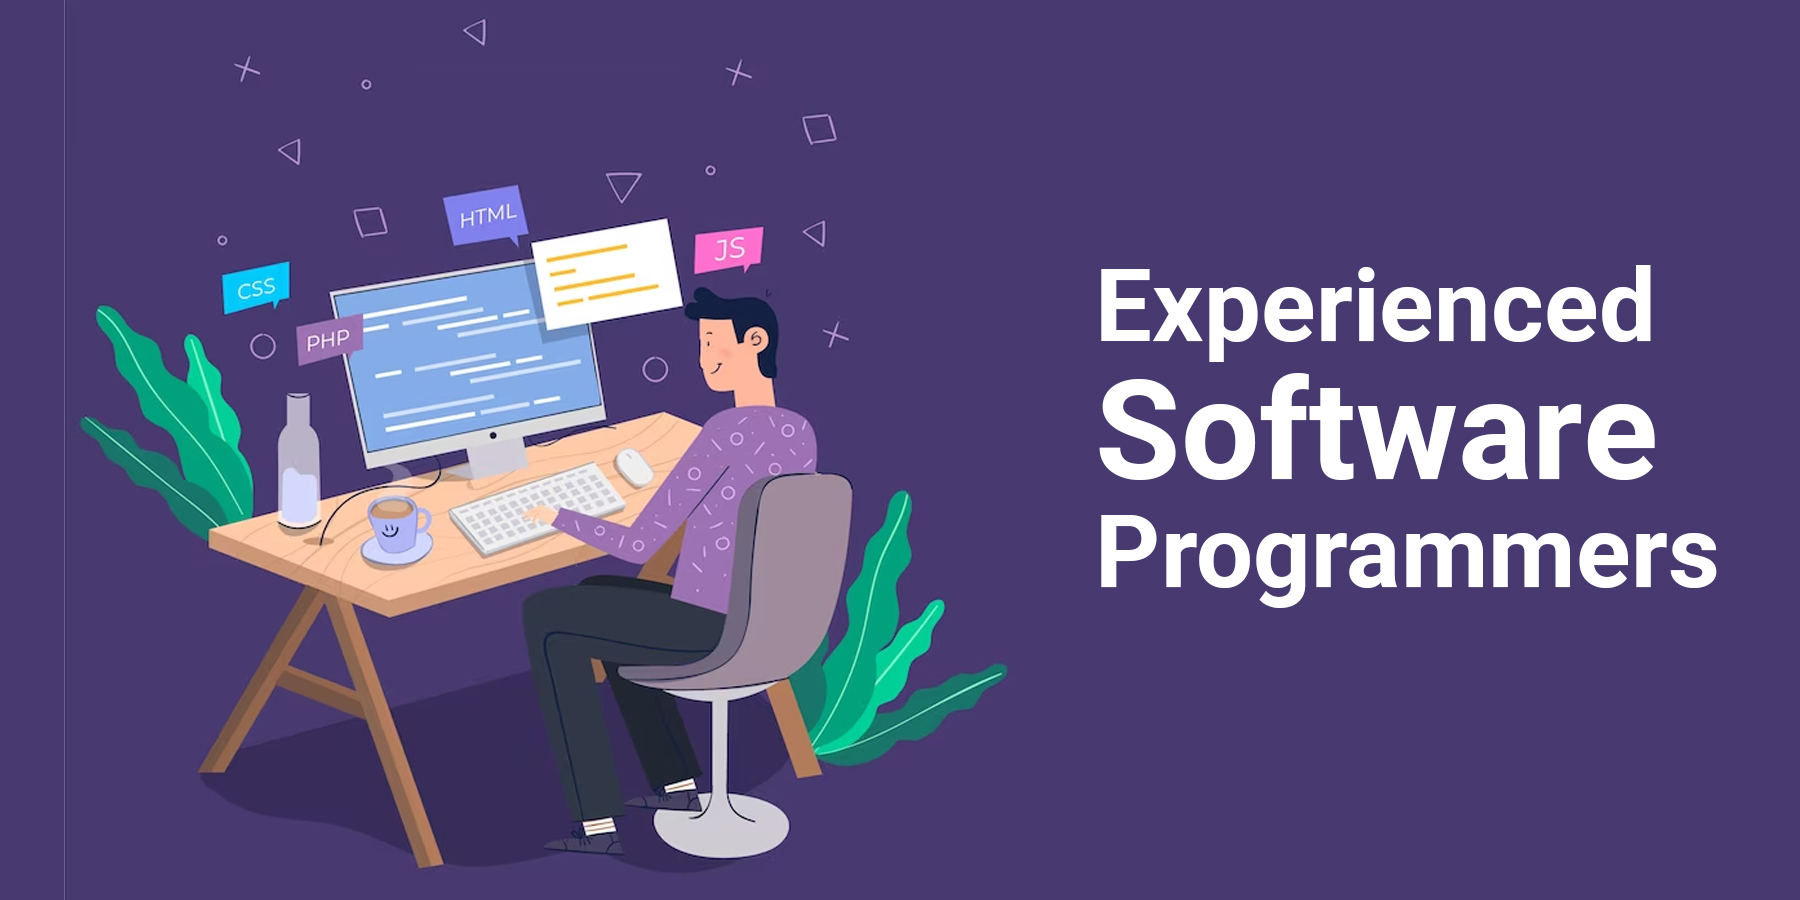 Experienced Software Programmers